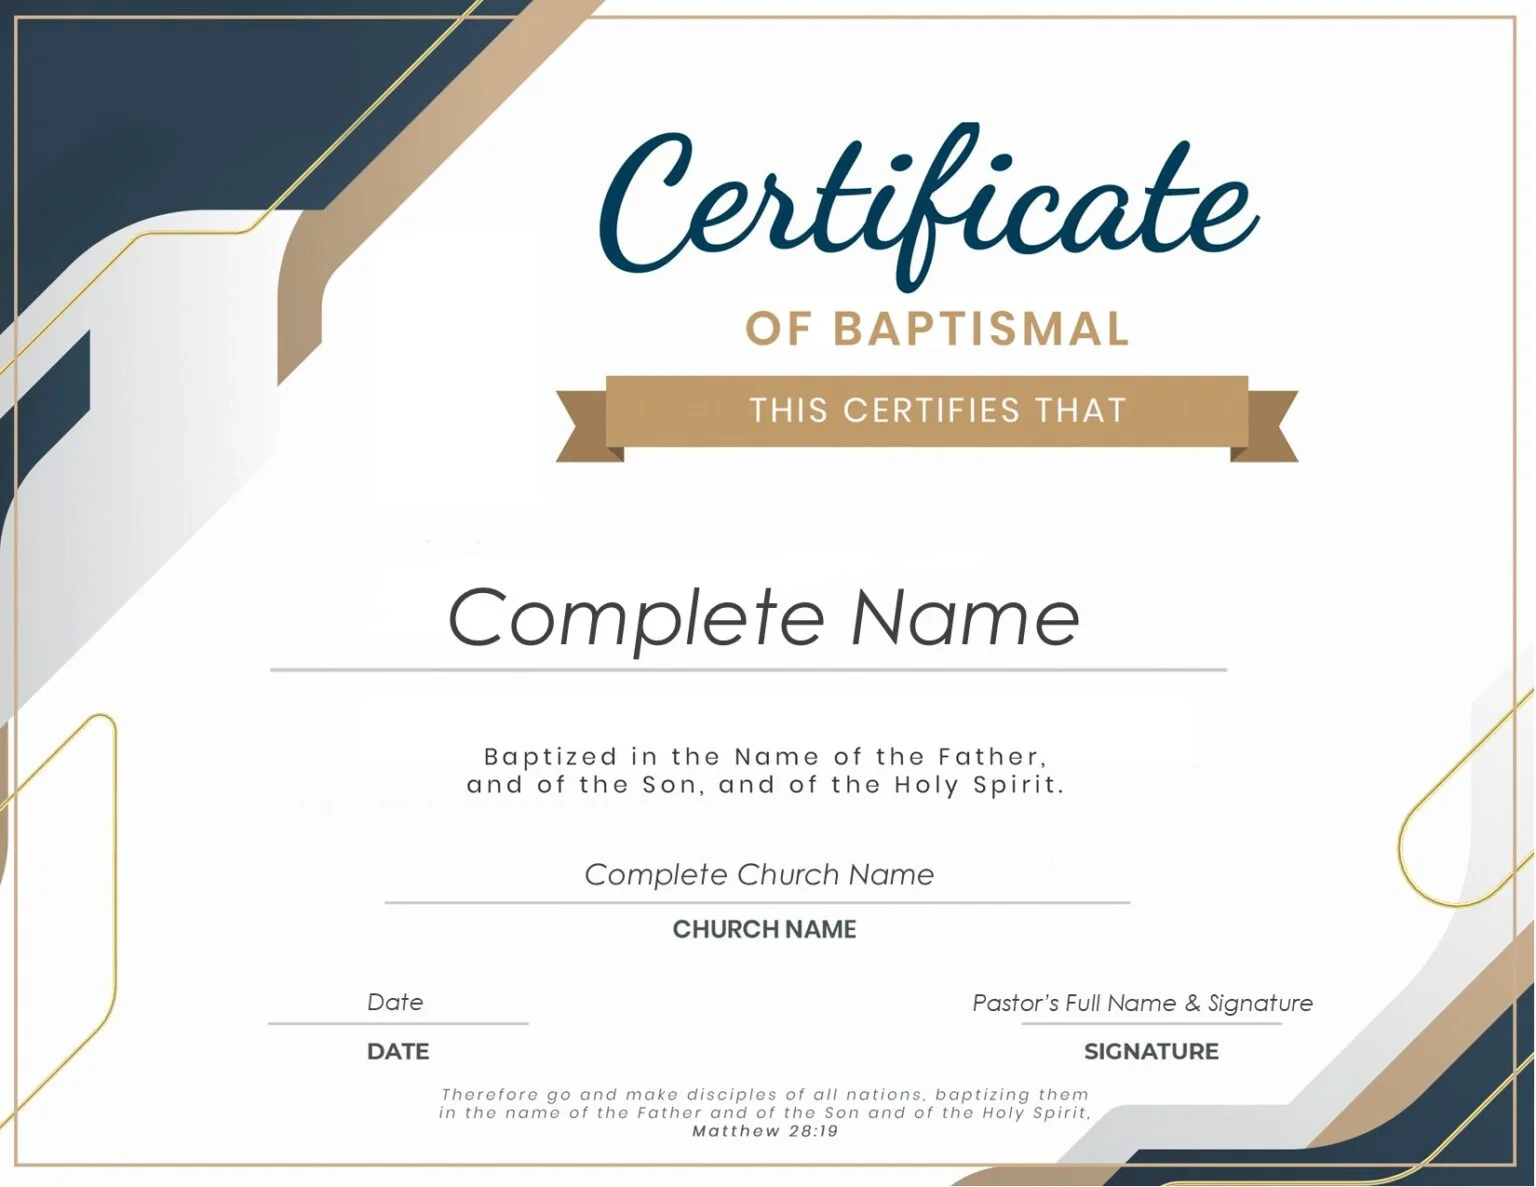 Baptismal Certificate - Free Baptism Certificate Template 4 by Ministry Voice